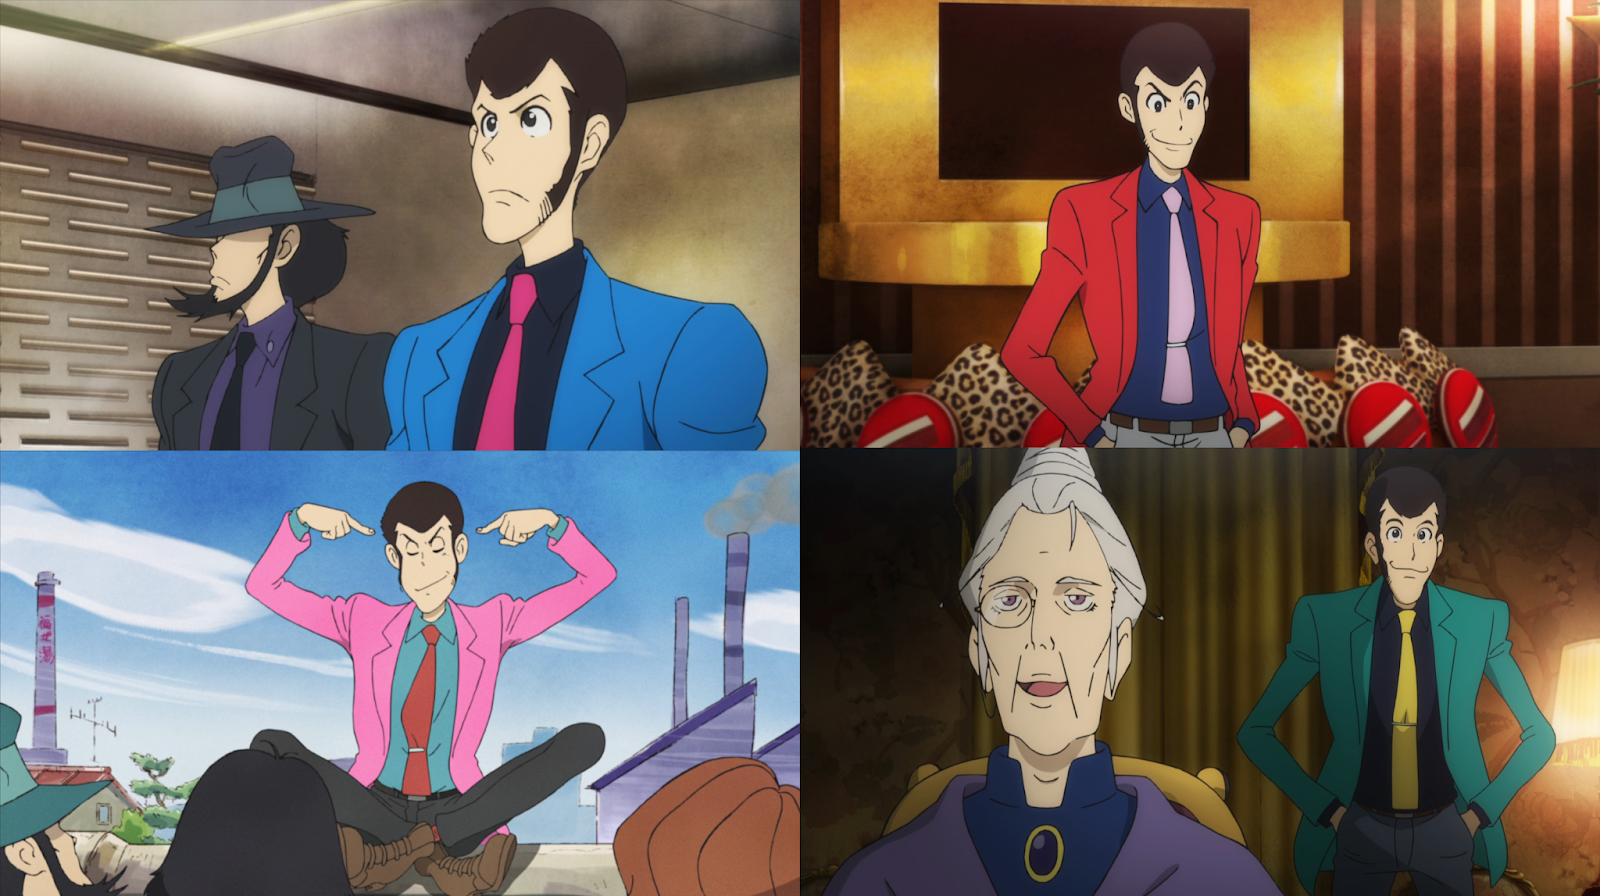 Illustrated Lands Lupin Iii Part 5 A Review Of The Series And Analysis Of The Franchise S Revival